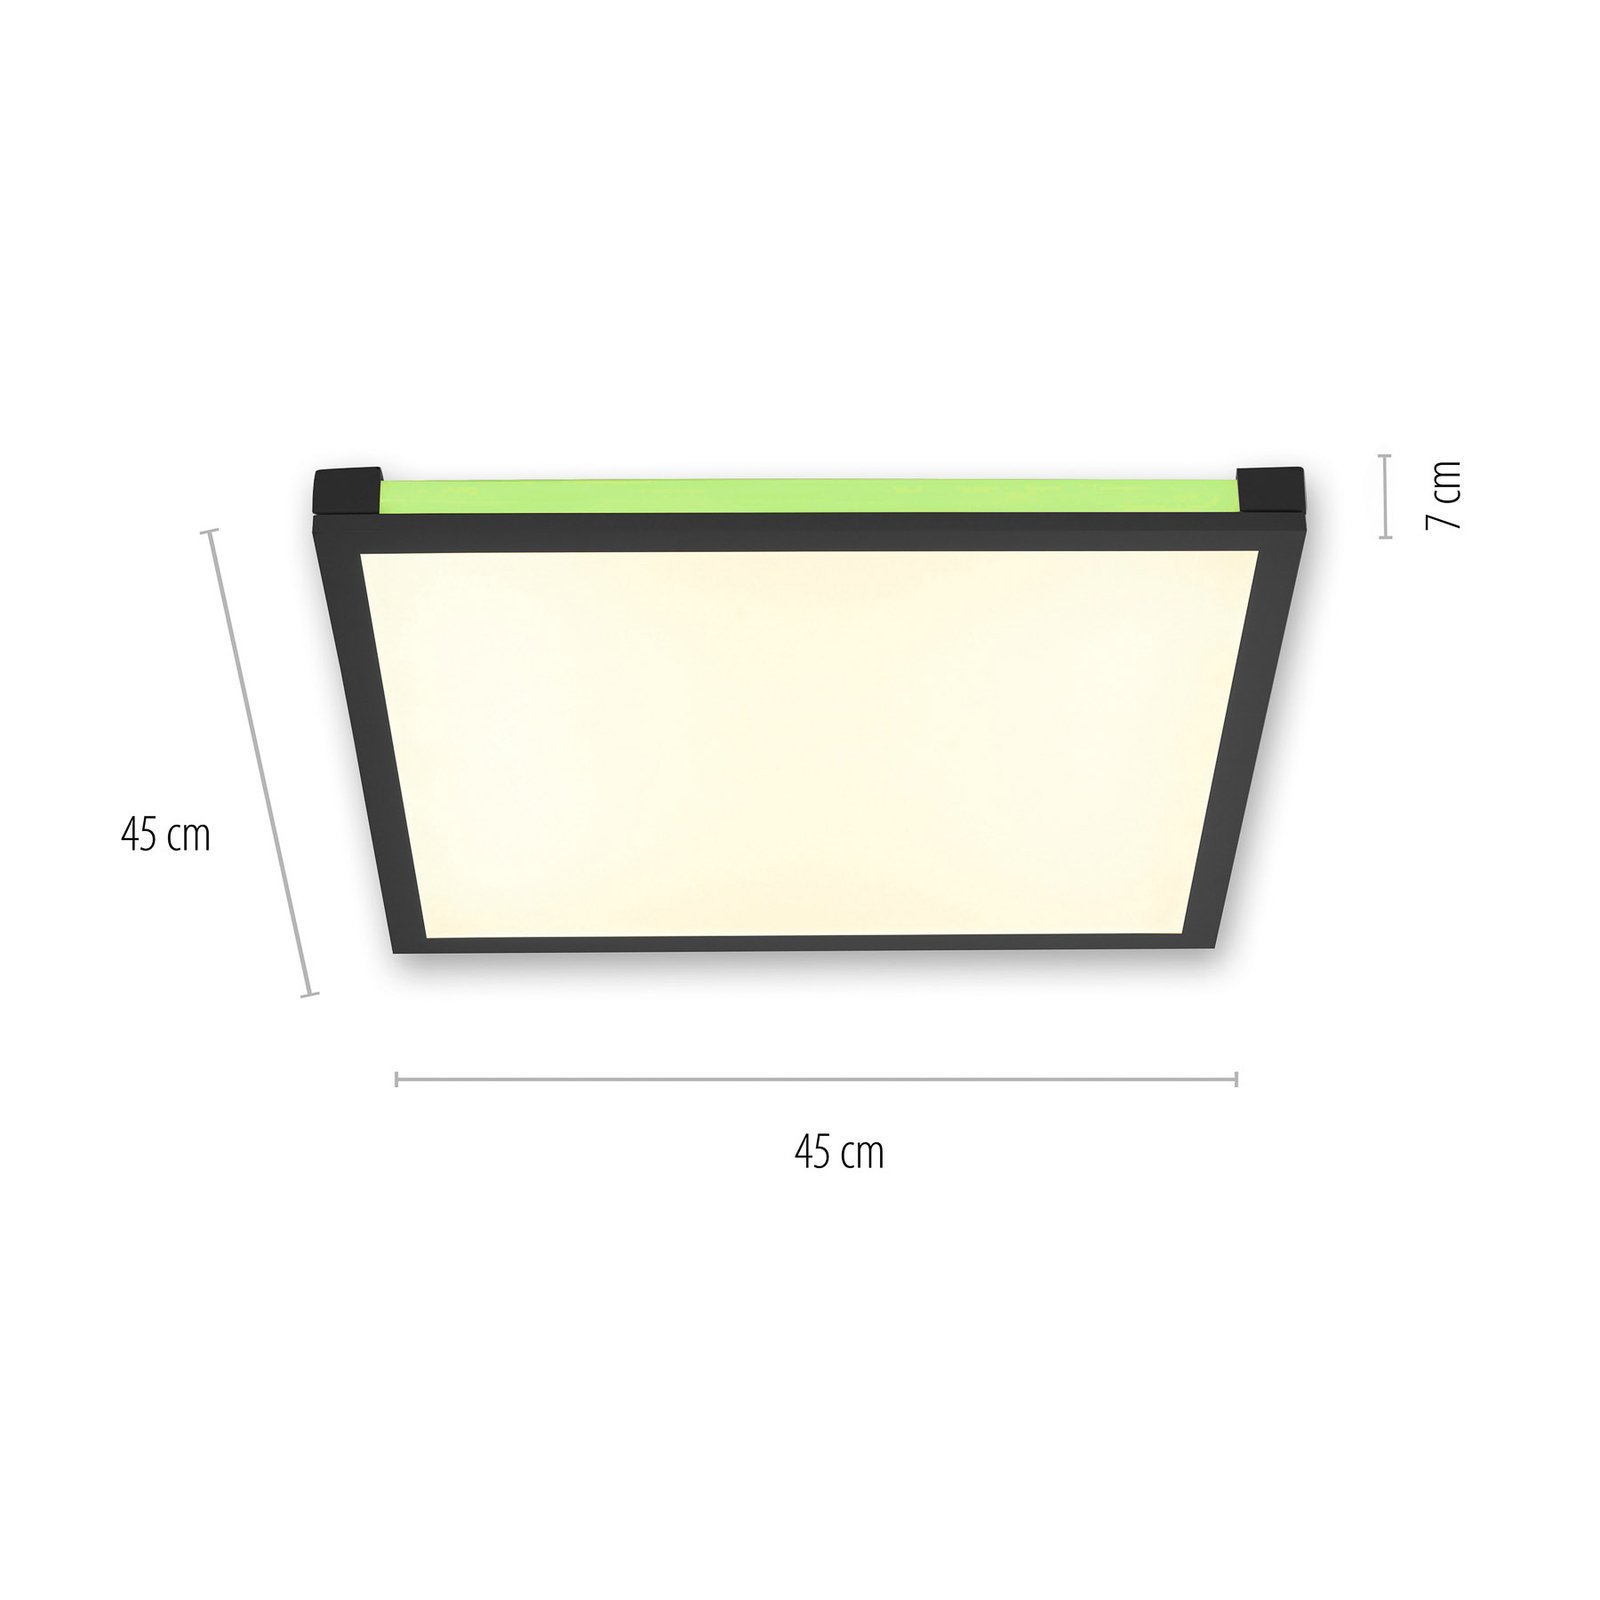 Mario LED ceiling lamp 45 x 45 cm, dimmable, RGBW